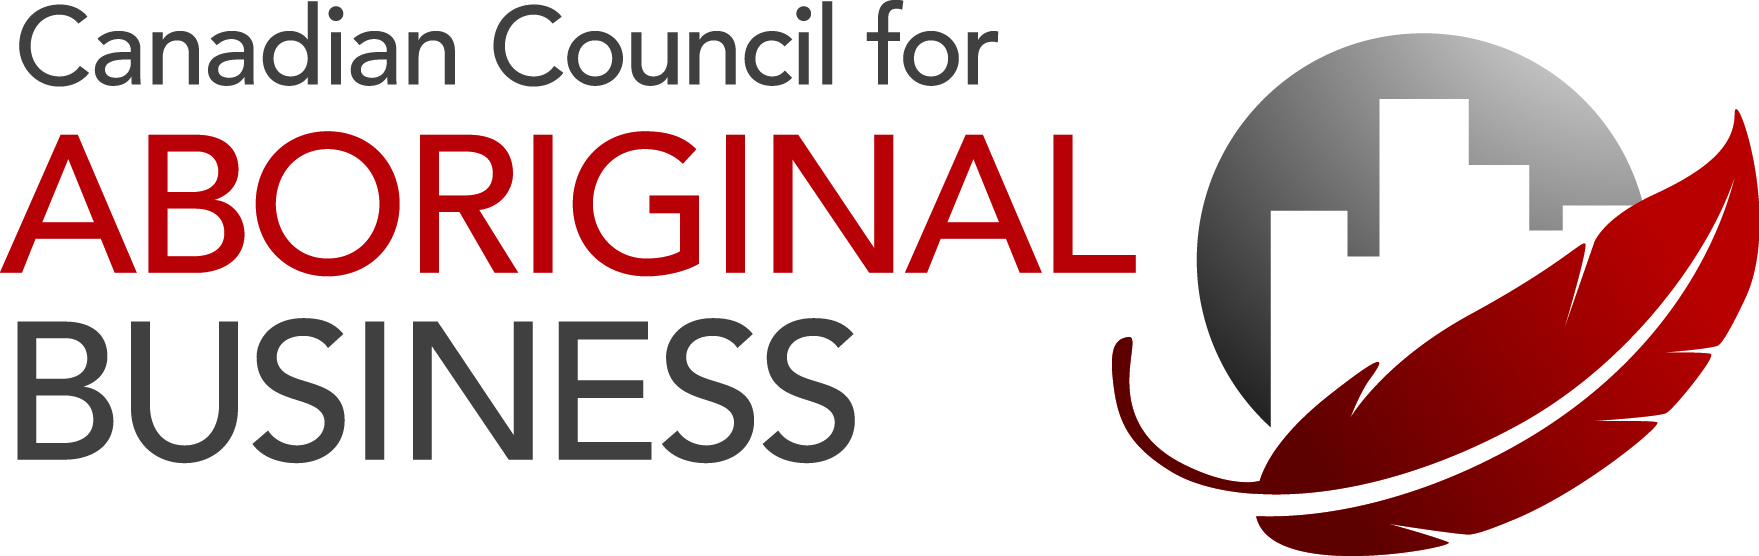 CANADIAN COUNCIL FOR ABORIGINAL BUSINESS ANNOUNCES A MORE THAN $3.4 MILLION, MULTI-YEAR FUNDING AGREEMENT WITH INDIGENOUS SERVICES CANADA